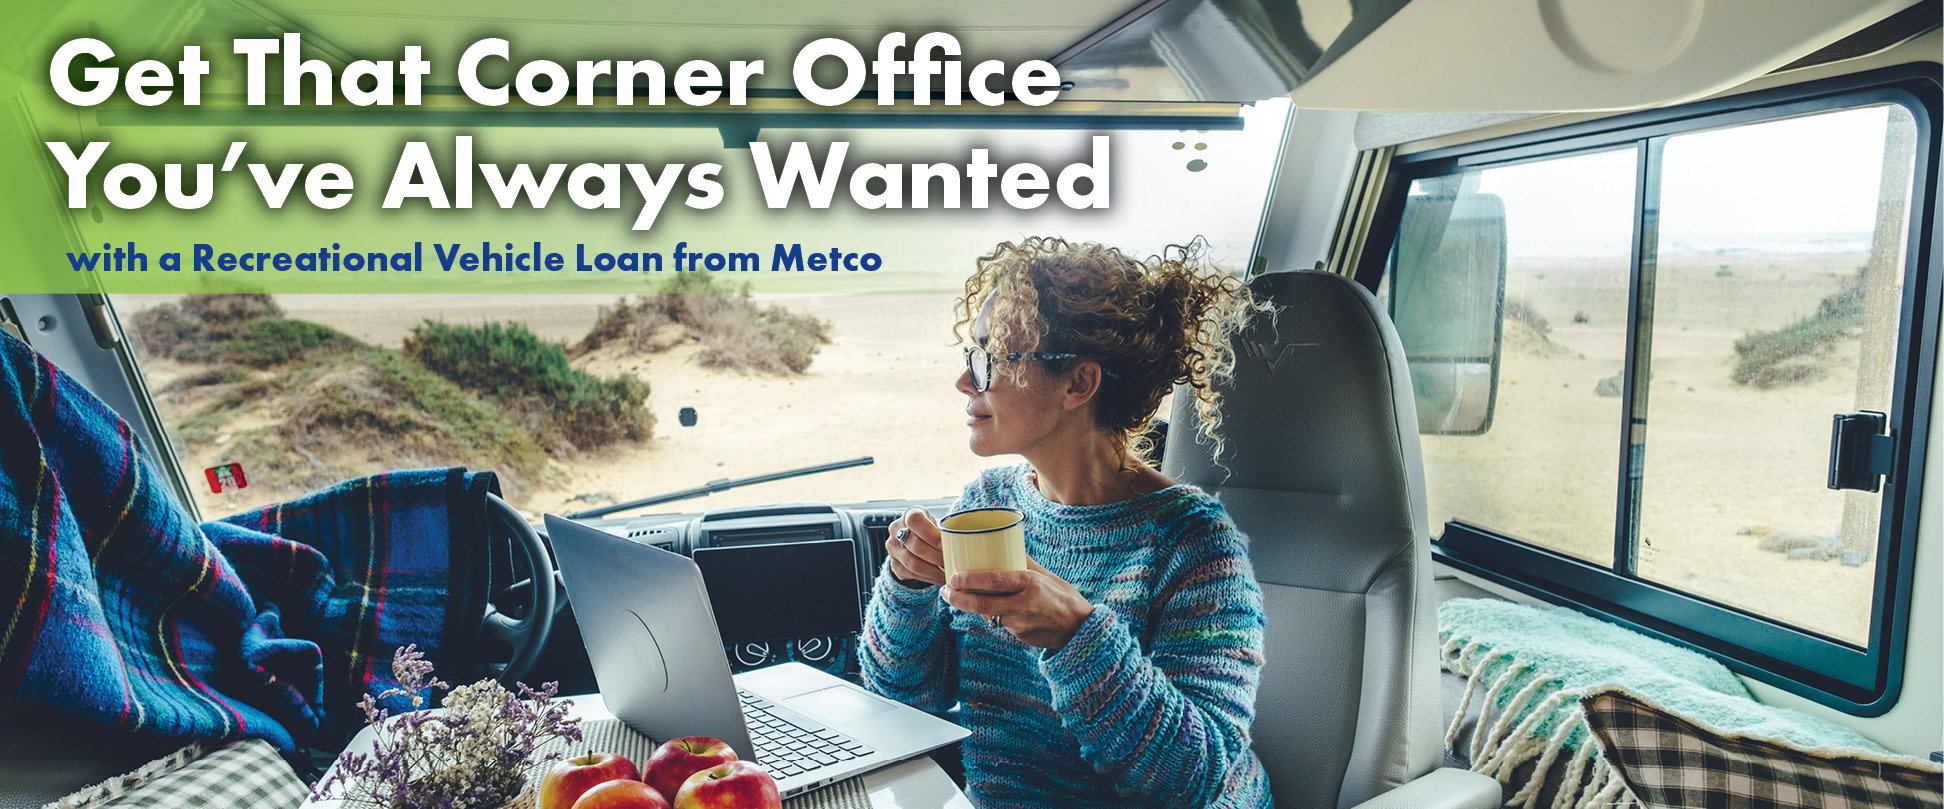 Get that corner office you've always wanted with a Recreational Vehicle Loan from Metco.